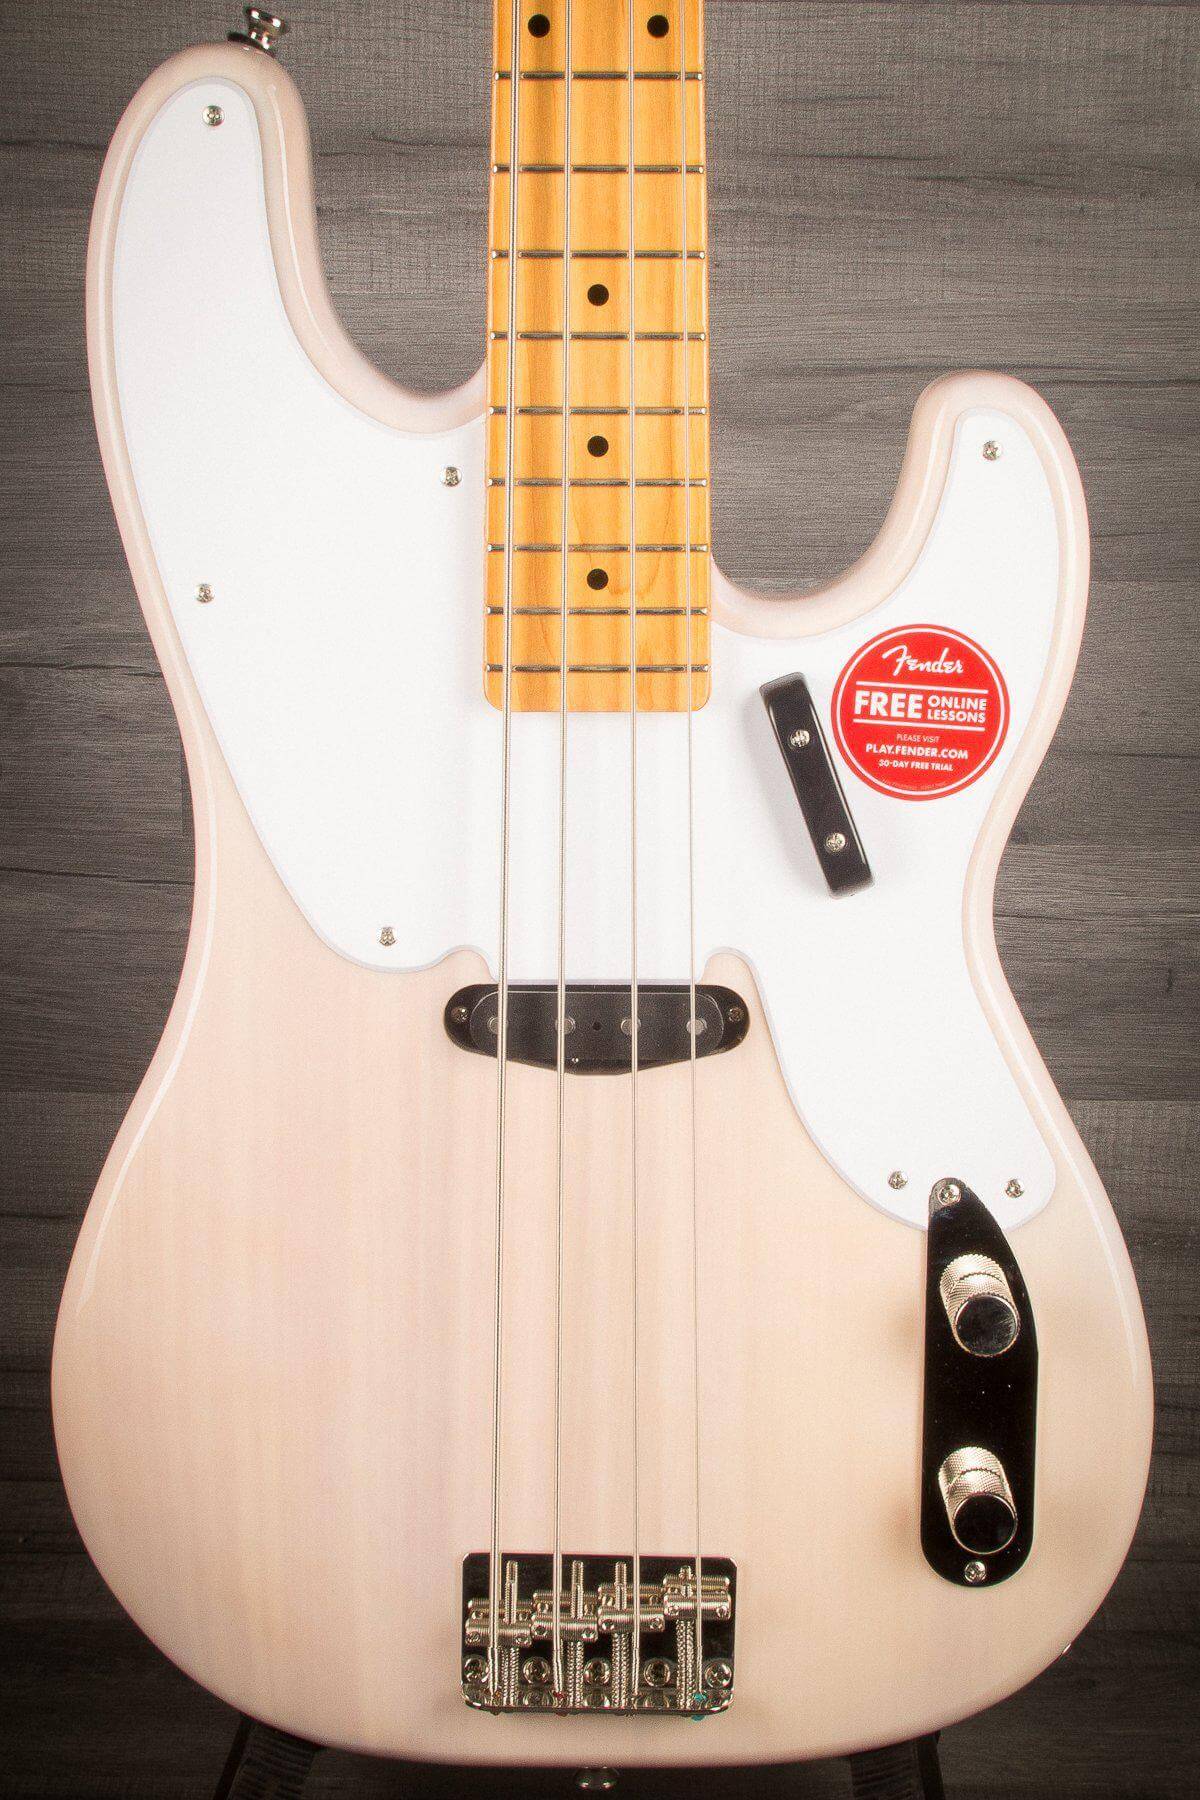 Squier Bass Guitar Squier Classic Vibe '50s Precision Bass White Blonde